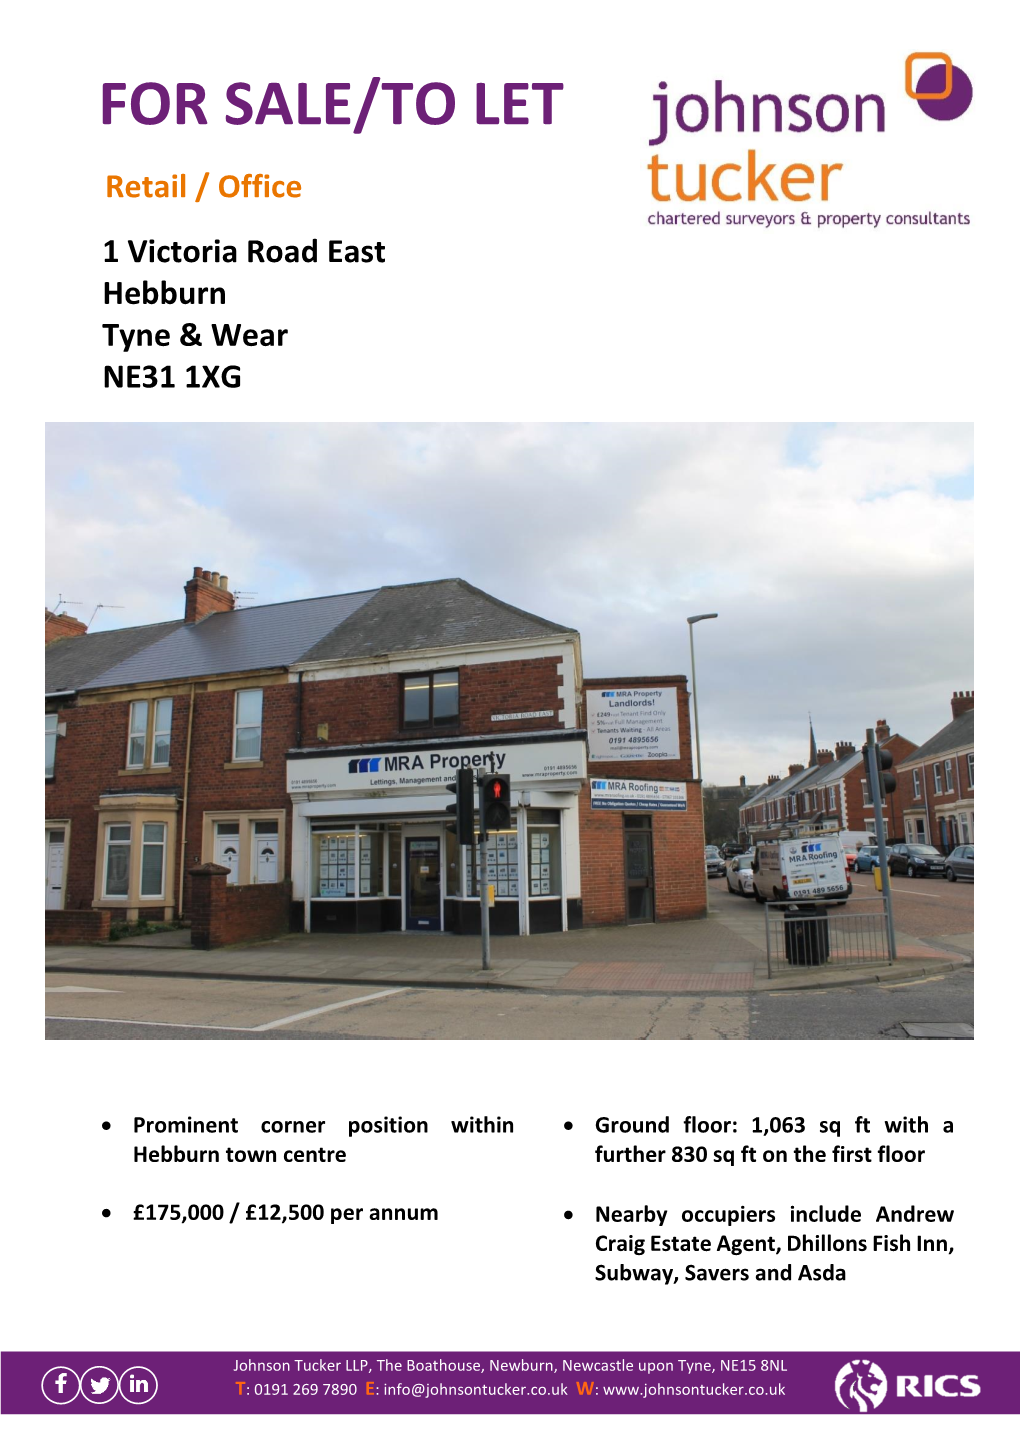 FOR SALE/TO LET Retail / Office 1 Victoria Road East Hebburn Tyne